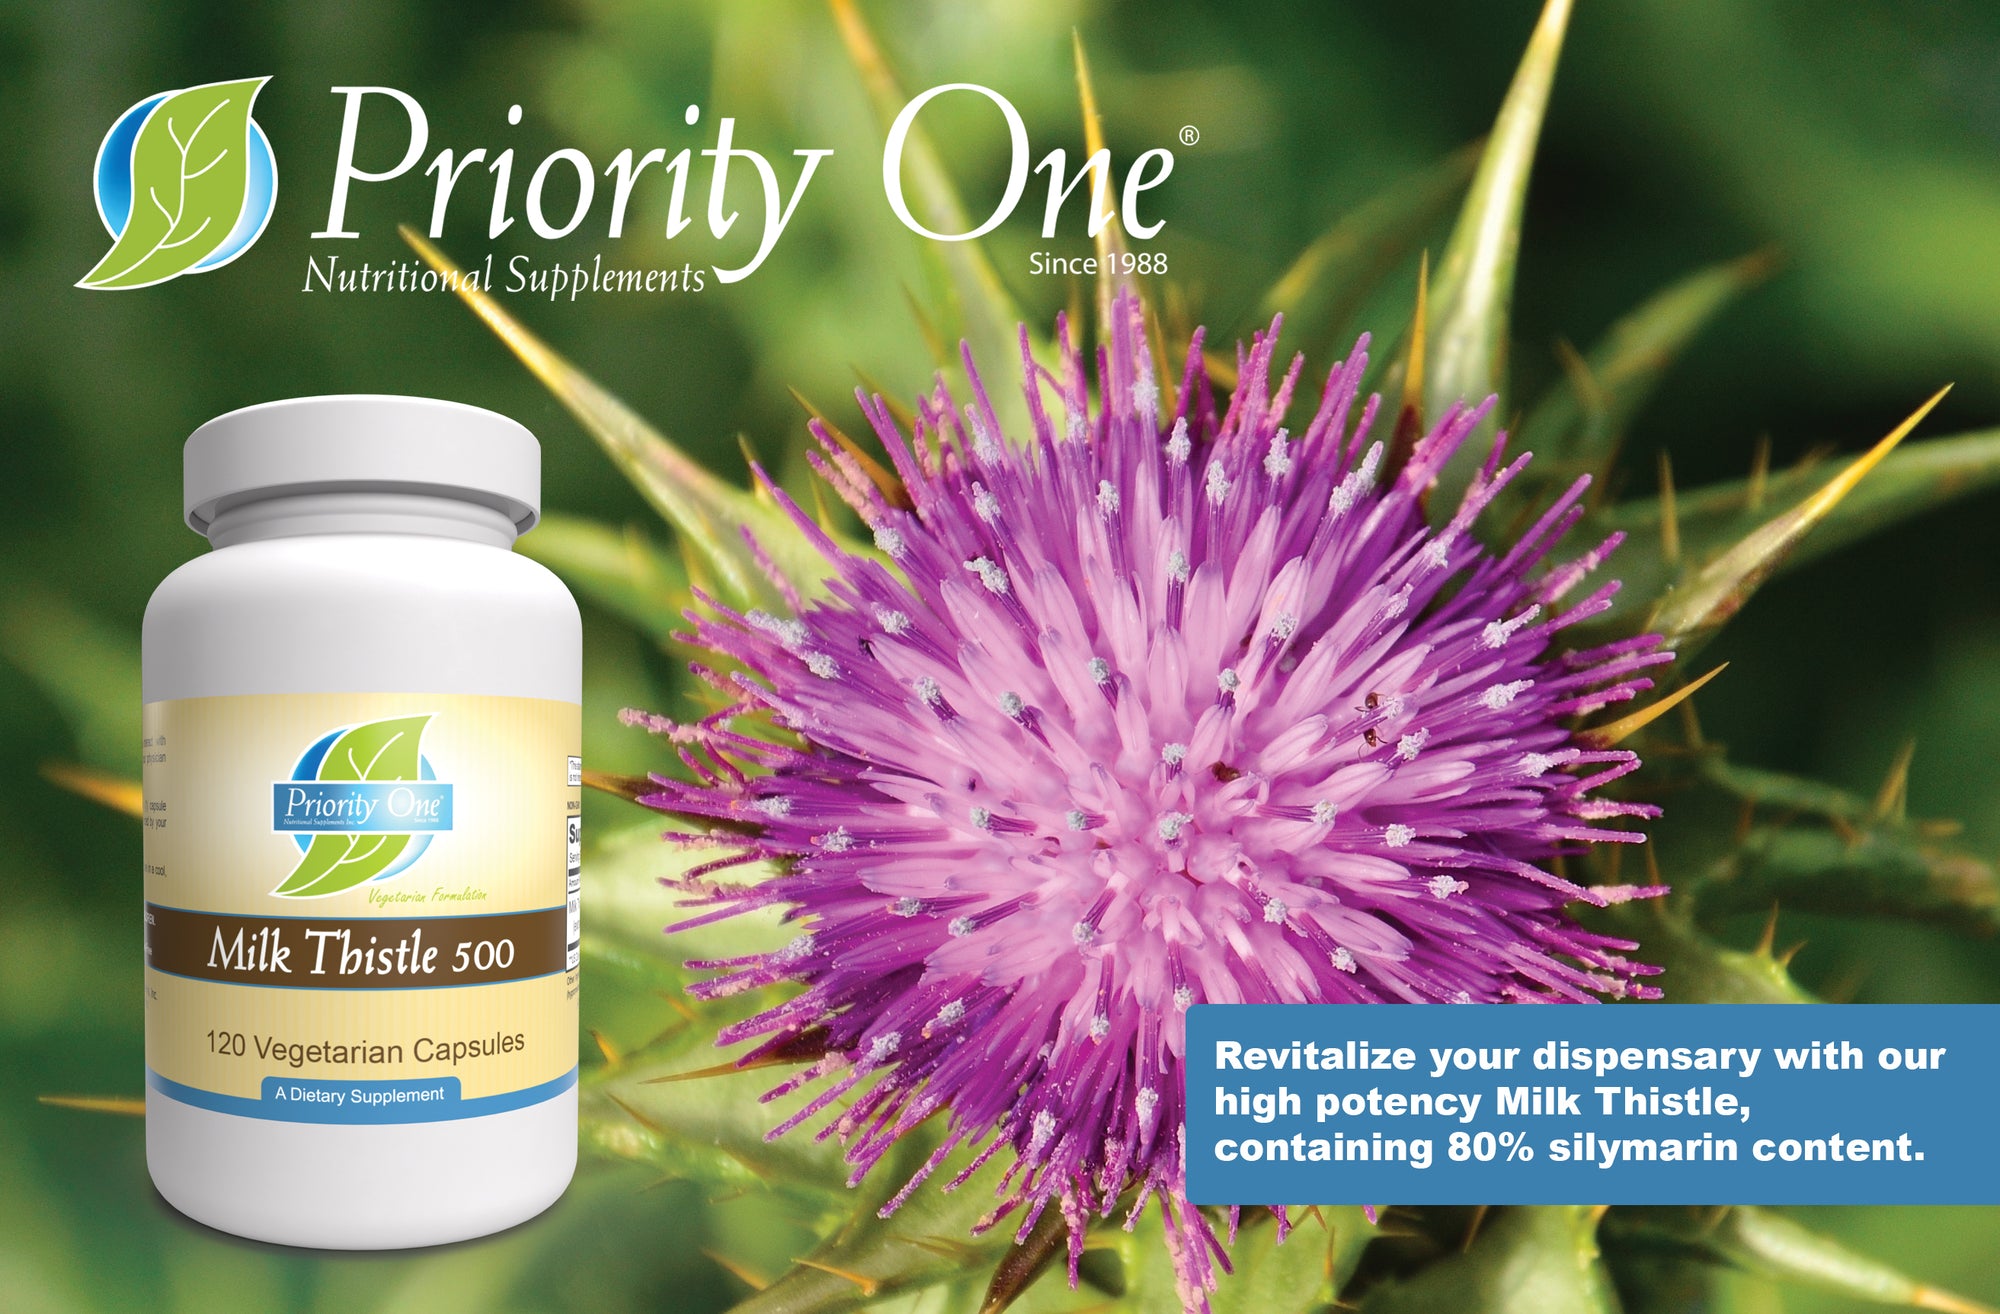 Milk Thistle 500mg (120 Vegetarian Capsules) Our high-potency 500mg milk thistle capsules for liver health feature an 80% silymarin content.*